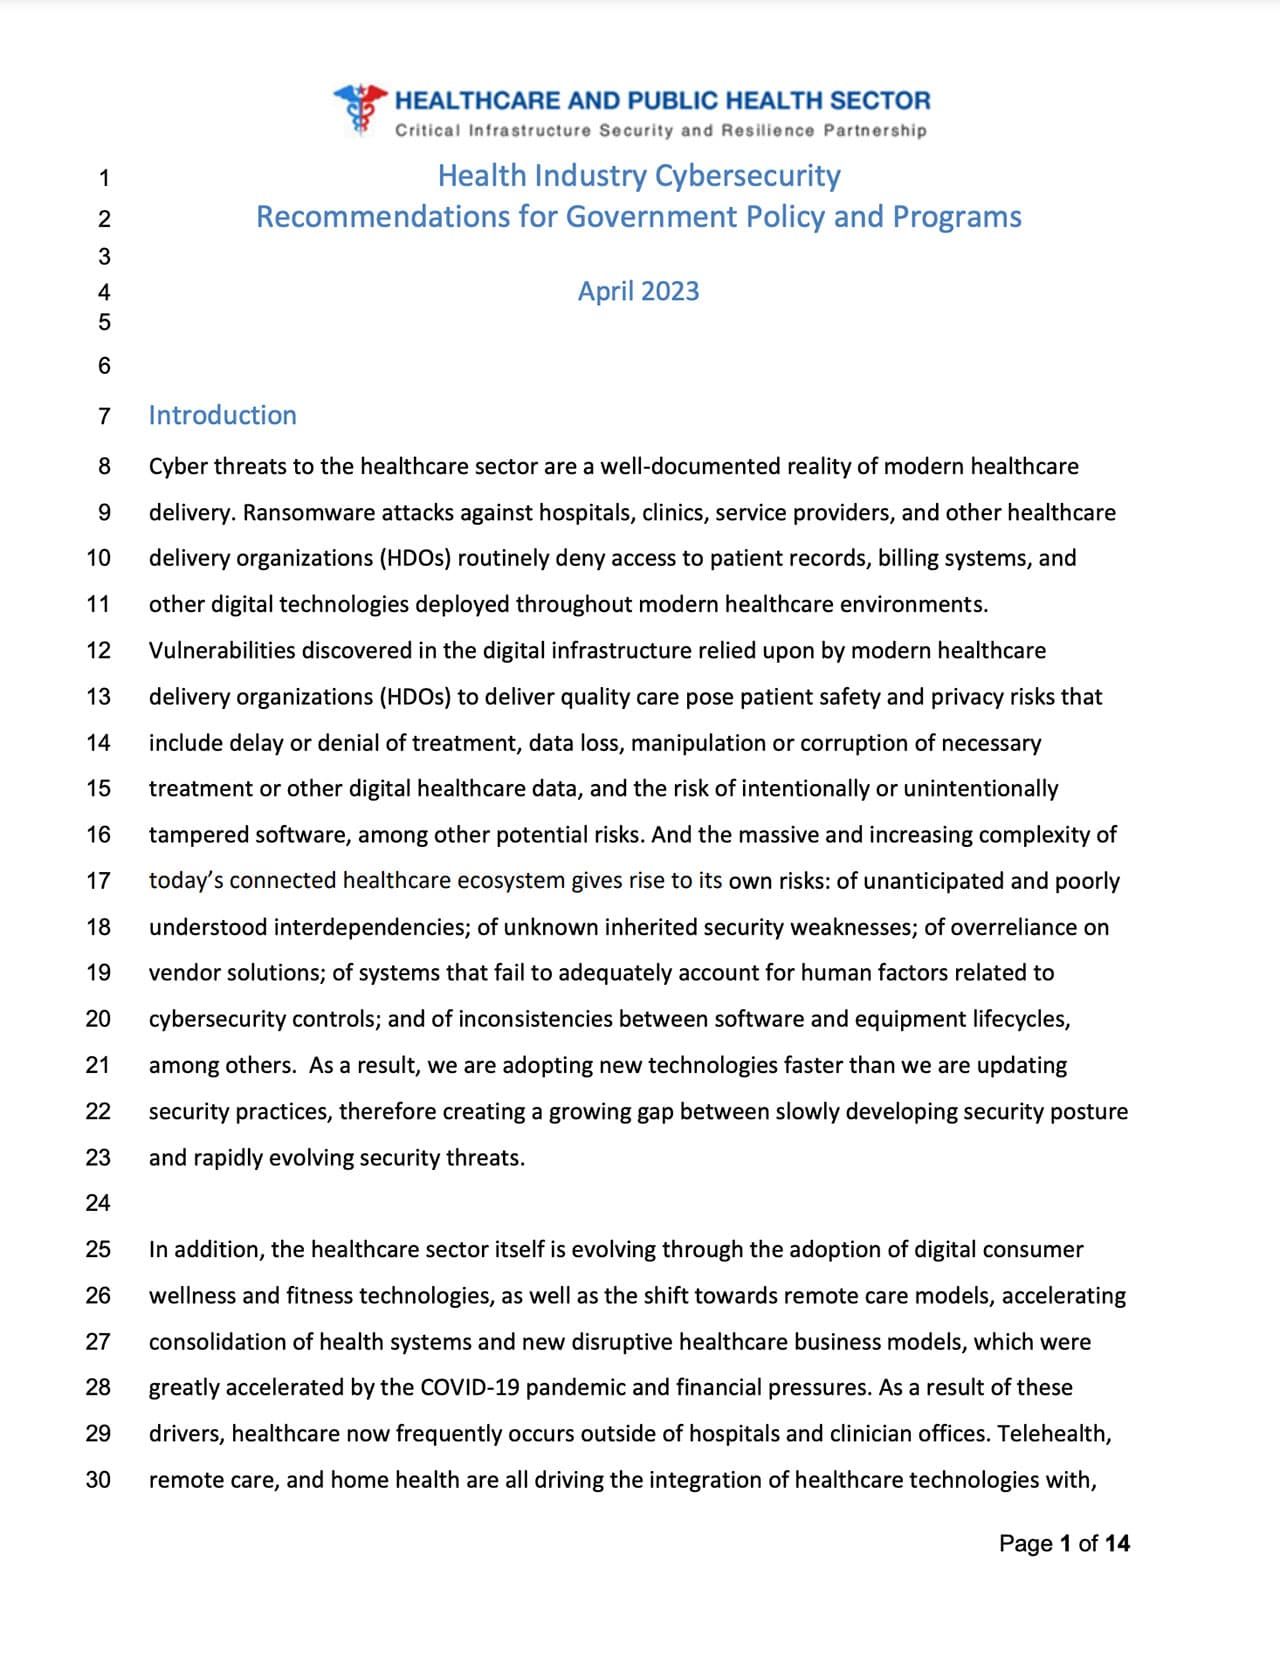 Health Industry Cybersecurity Recommendations for Government Policy and Programs